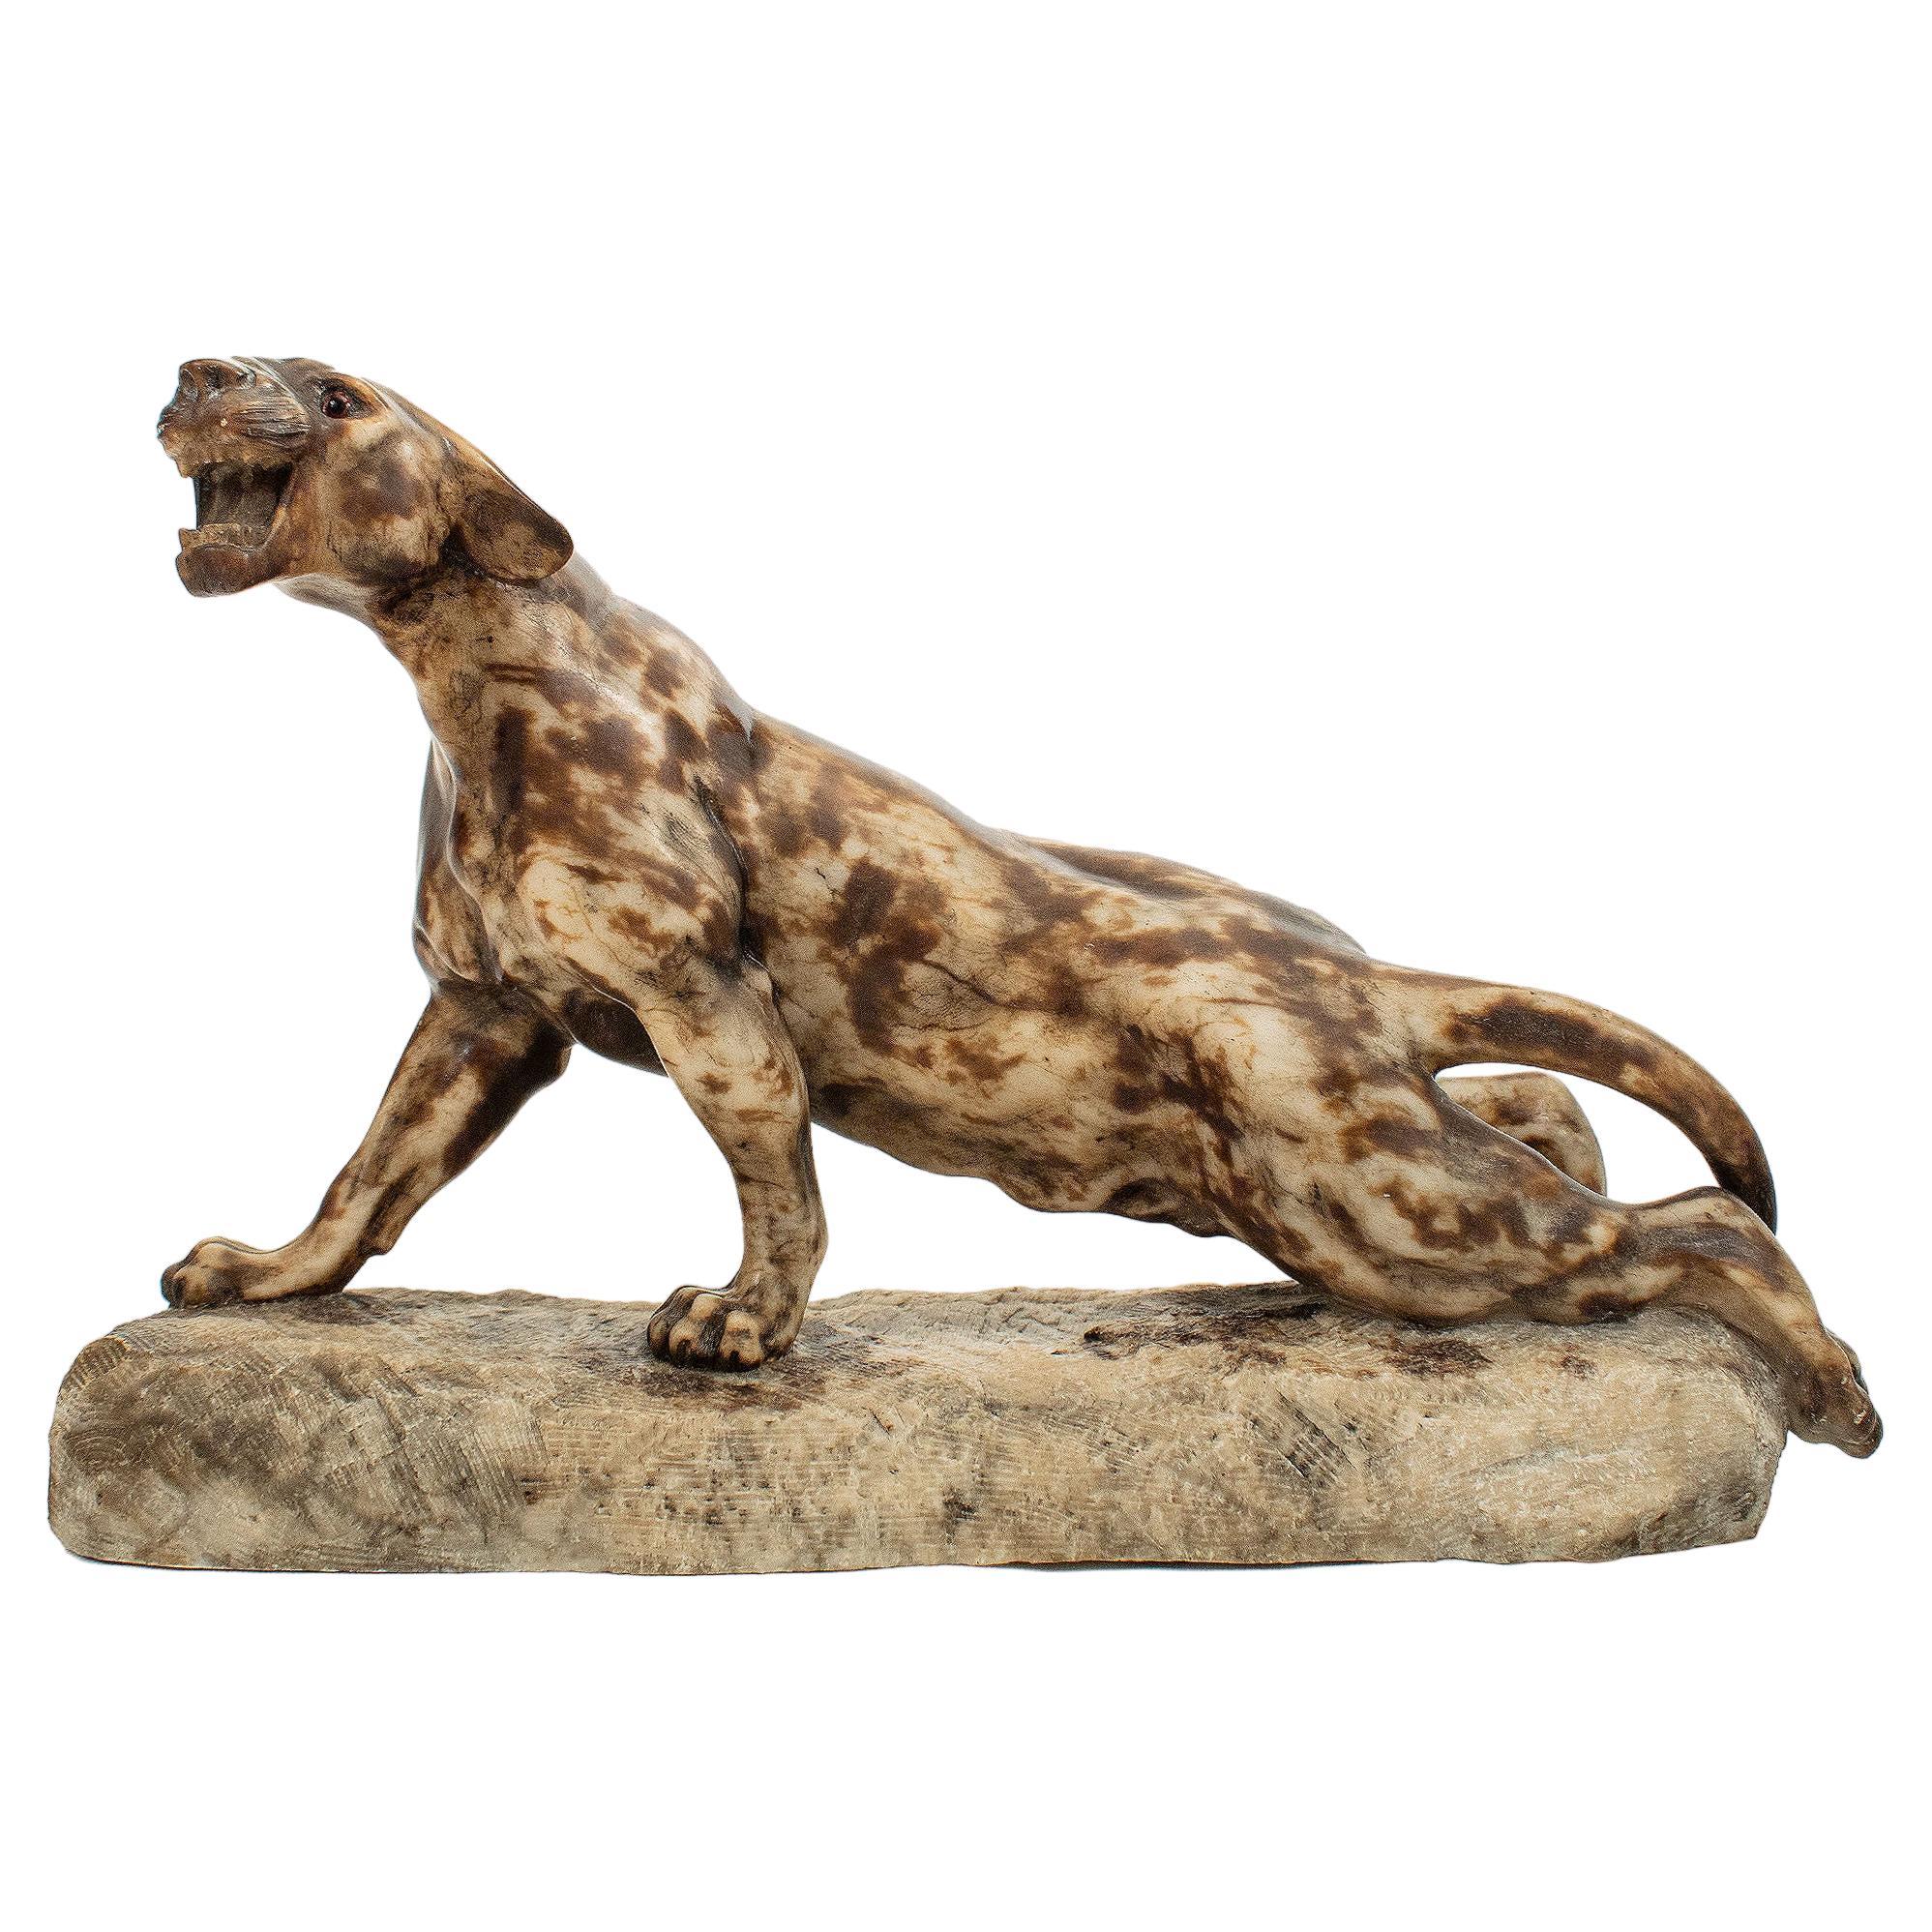 Art Deco Alabaster sculpture depicting a Roaring Tiger, early 20th century